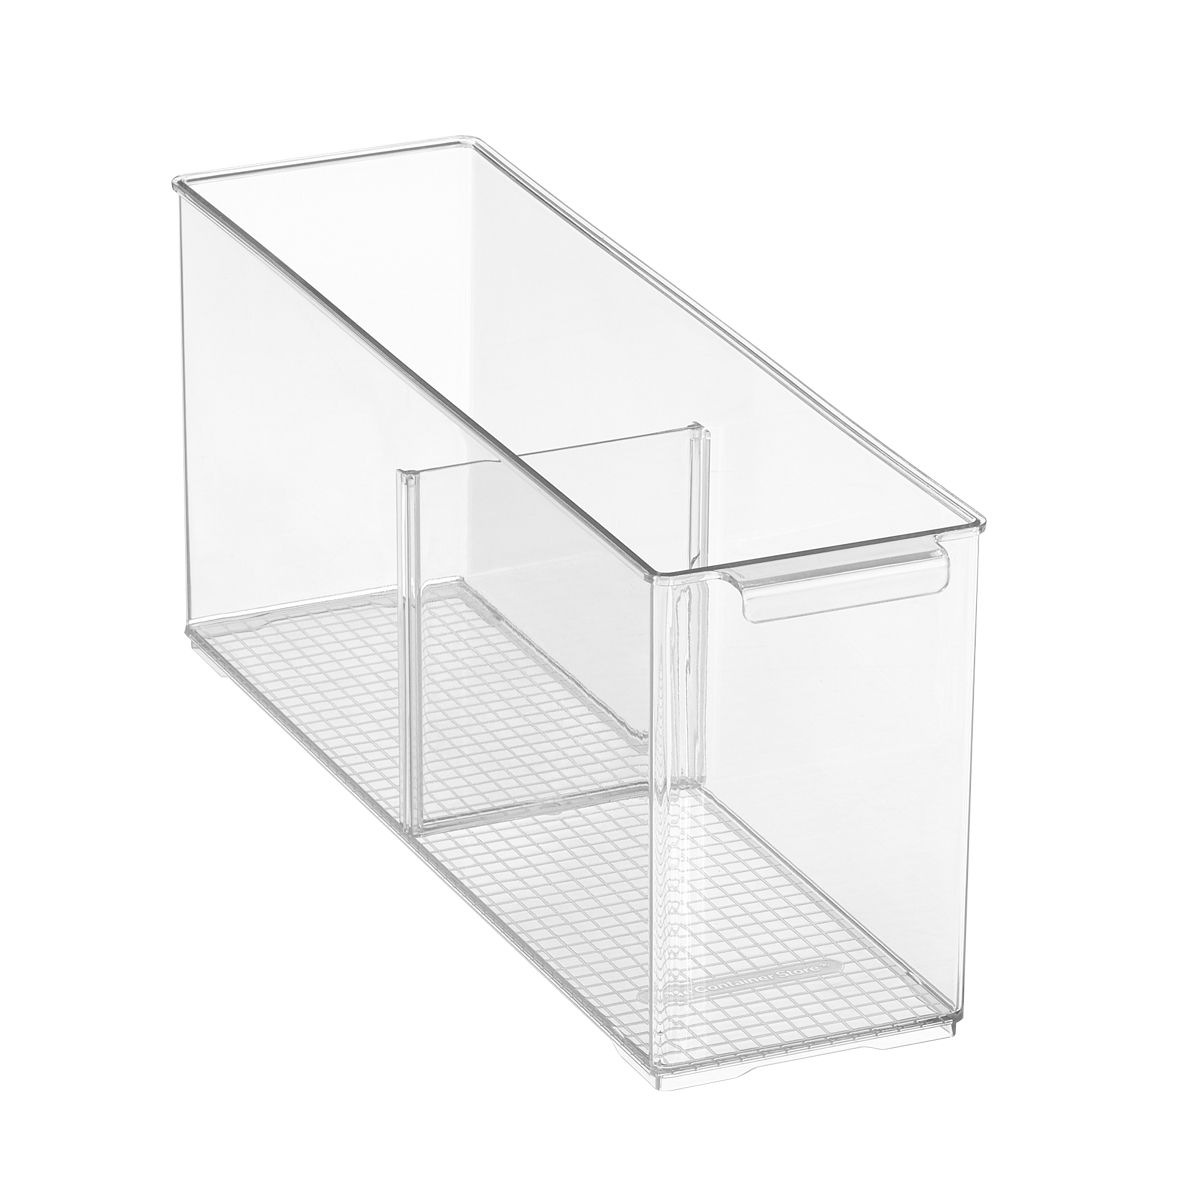 Everything Organizer Small Shelf Depth Pantry Bin w/ Divider | The Container Store